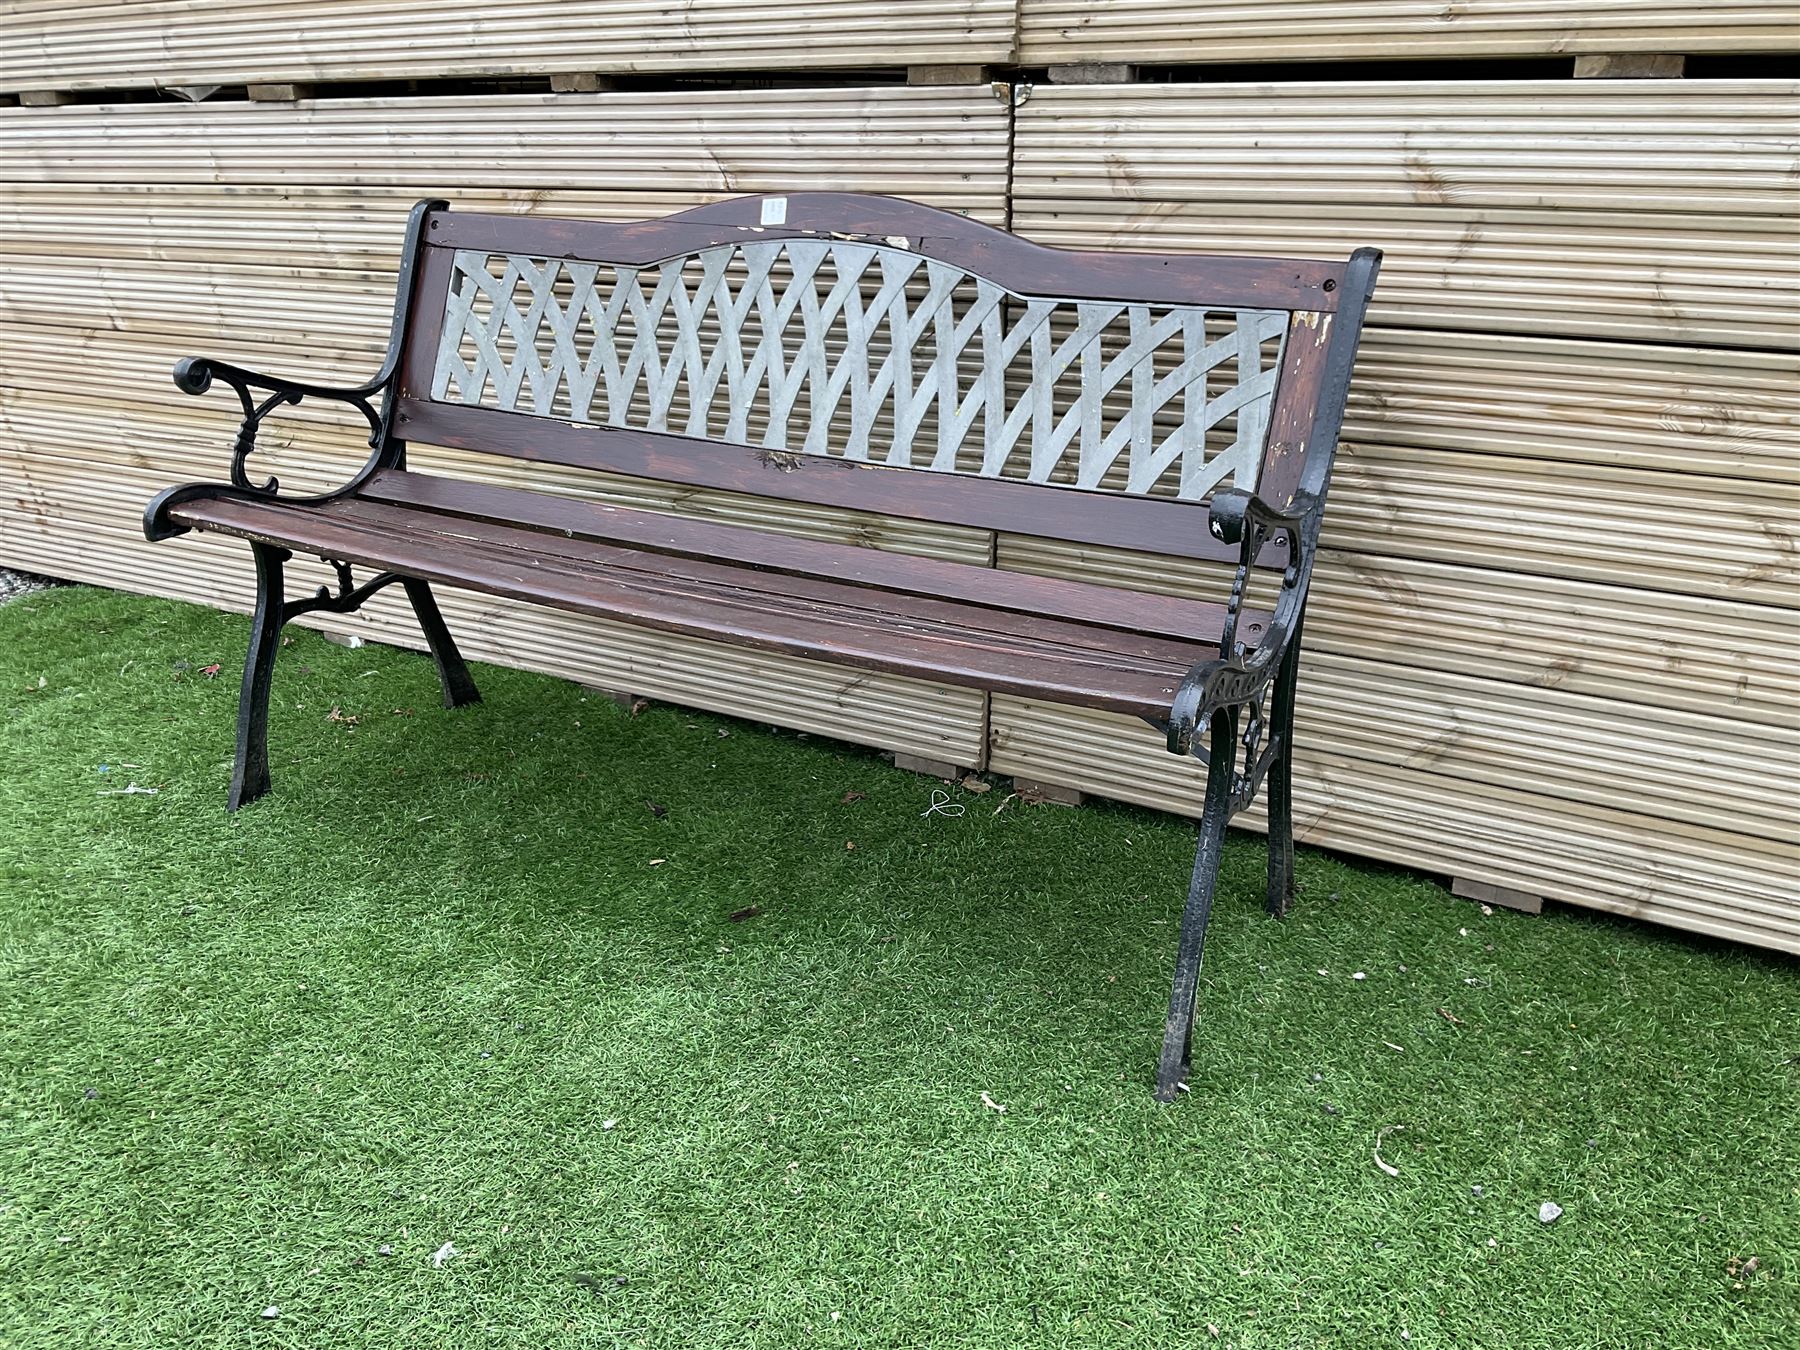 Large cast metal and wood slatted garden bench with lattice back